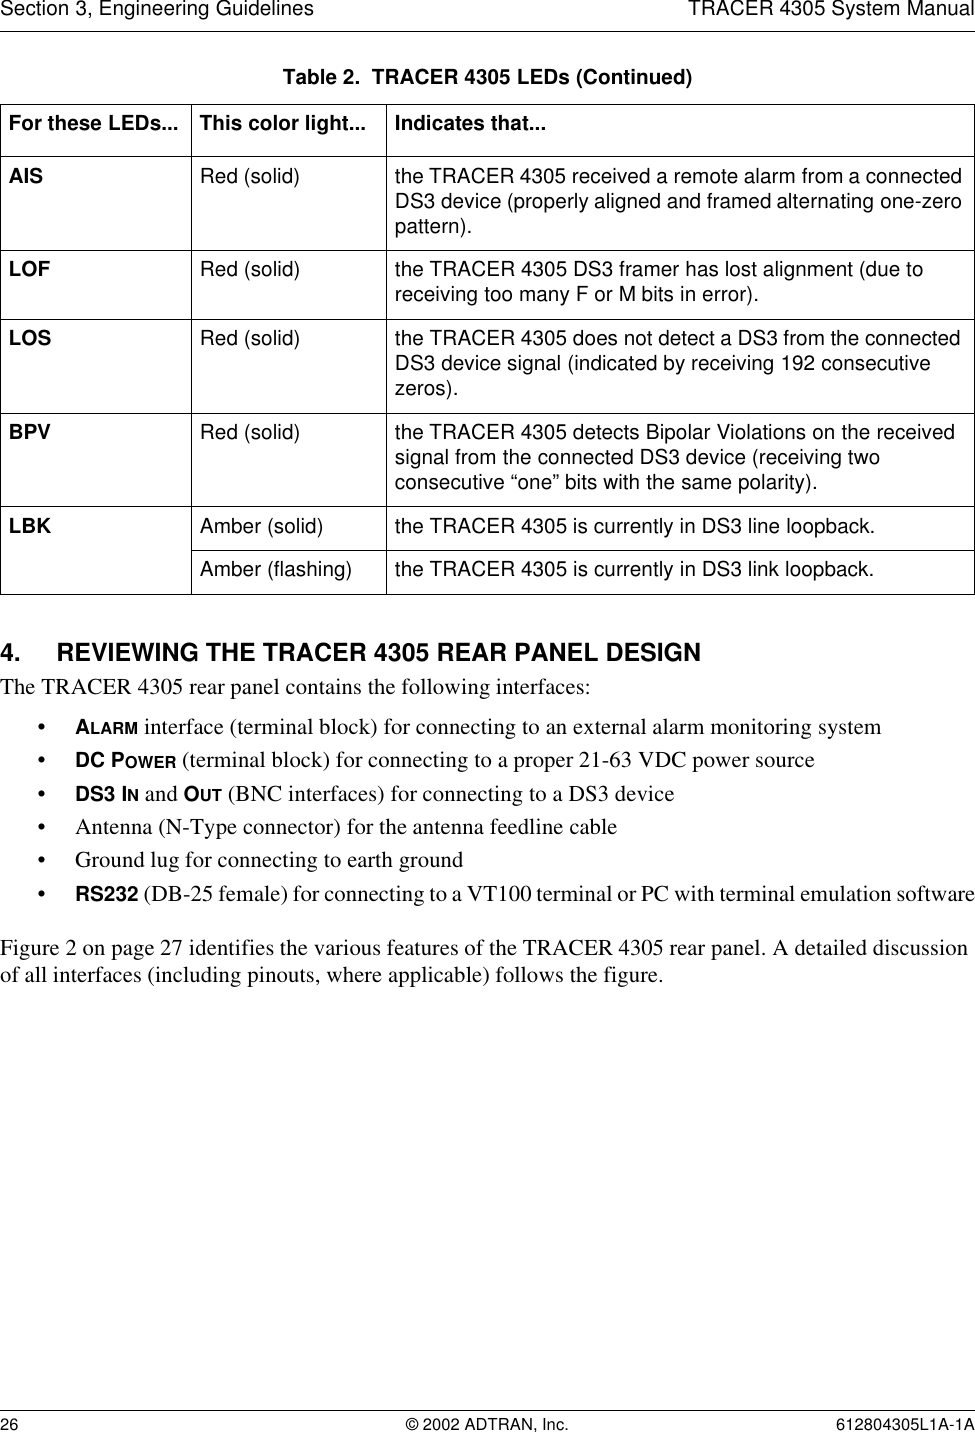 Section 3, Engineering Guidelines TRACER 4305 System Manual26 © 2002 ADTRAN, Inc. 612804305L1A-1A4. REVIEWING THE TRACER 4305 REAR PANEL DESIGNThe TRACER 4305 rear panel contains the following interfaces:•ALARM interface (terminal block) for connecting to an external alarm monitoring system•DC POWER (terminal block) for connecting to a proper 21-63 VDC power source•DS3 IN and OUT (BNC interfaces) for connecting to a DS3 device• Antenna (N-Type connector) for the antenna feedline cable• Ground lug for connecting to earth ground•RS232 (DB-25 female) for connecting to a VT100 terminal or PC with terminal emulation softwareFigure 2 on page 27 identifies the various features of the TRACER 4305 rear panel. A detailed discussion of all interfaces (including pinouts, where applicable) follows the figure.AIS Red (solid) the TRACER 4305 received a remote alarm from a connected DS3 device (properly aligned and framed alternating one-zero pattern).LOF Red (solid) the TRACER 4305 DS3 framer has lost alignment (due to receiving too many F or M bits in error).LOS Red (solid) the TRACER 4305 does not detect a DS3 from the connected DS3 device signal (indicated by receiving 192 consecutive zeros).BPV Red (solid) the TRACER 4305 detects Bipolar Violations on the received signal from the connected DS3 device (receiving two consecutive “one” bits with the same polarity).LBK Amber (solid) the TRACER 4305 is currently in DS3 line loopback.Amber (flashing) the TRACER 4305 is currently in DS3 link loopback.Table 2.  TRACER 4305 LEDs (Continued)For these LEDs... This color light... Indicates that...